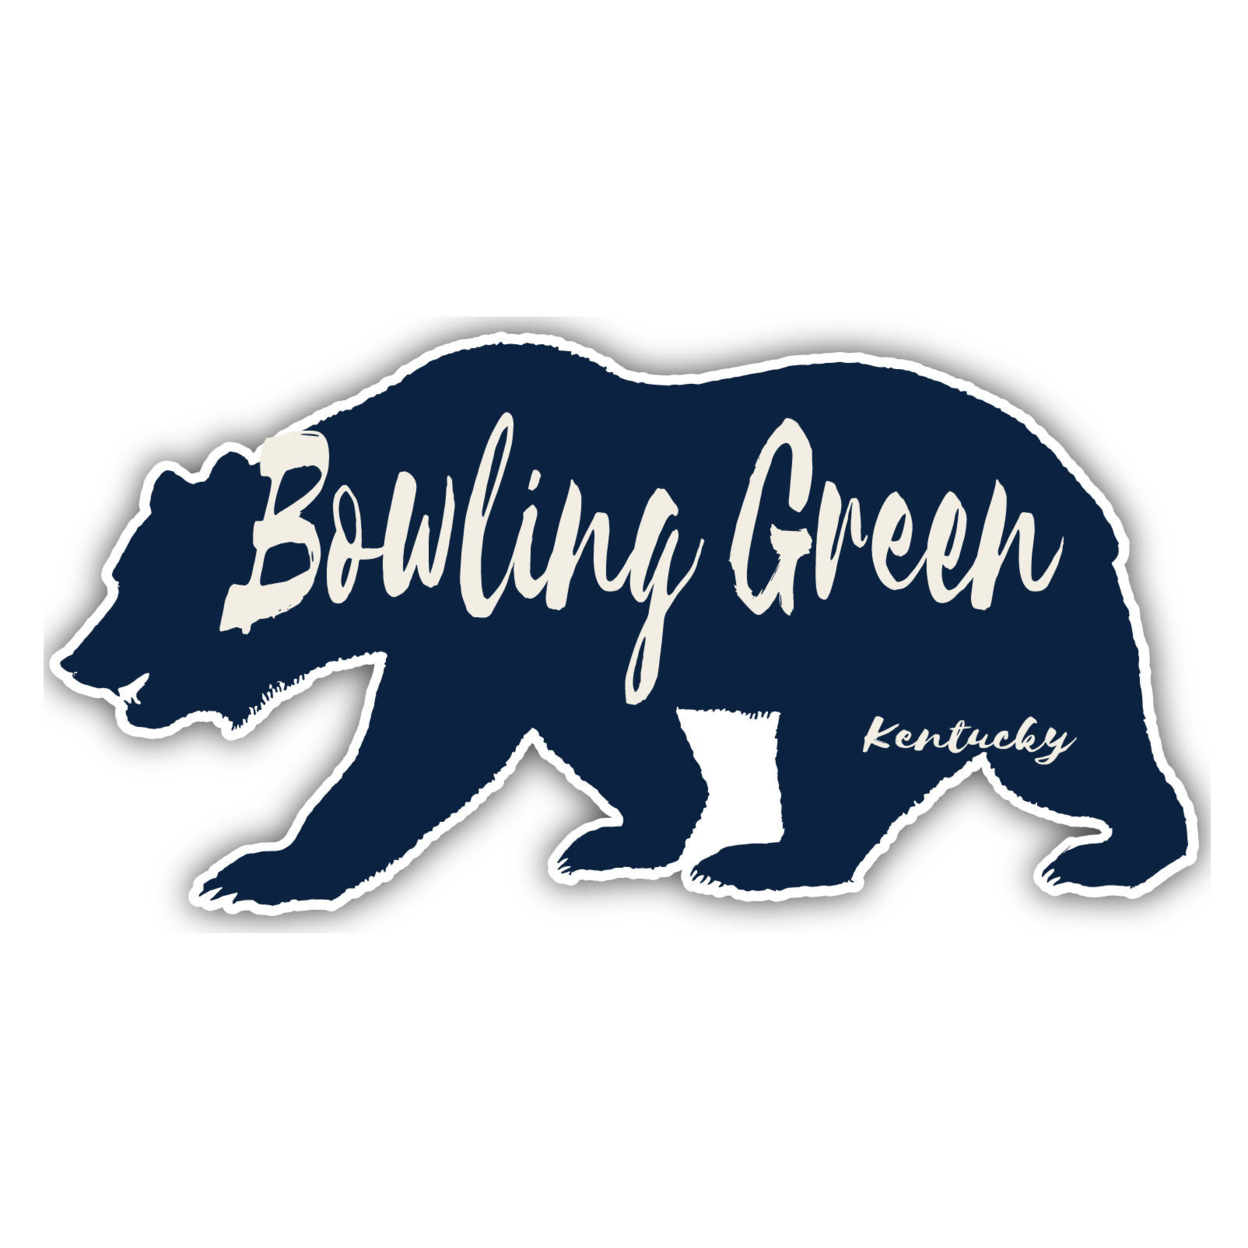 Bowling Green Kentucky Souvenir Decorative Stickers (Choose Theme And Size) - Single Unit, 10-Inch, Camp Life